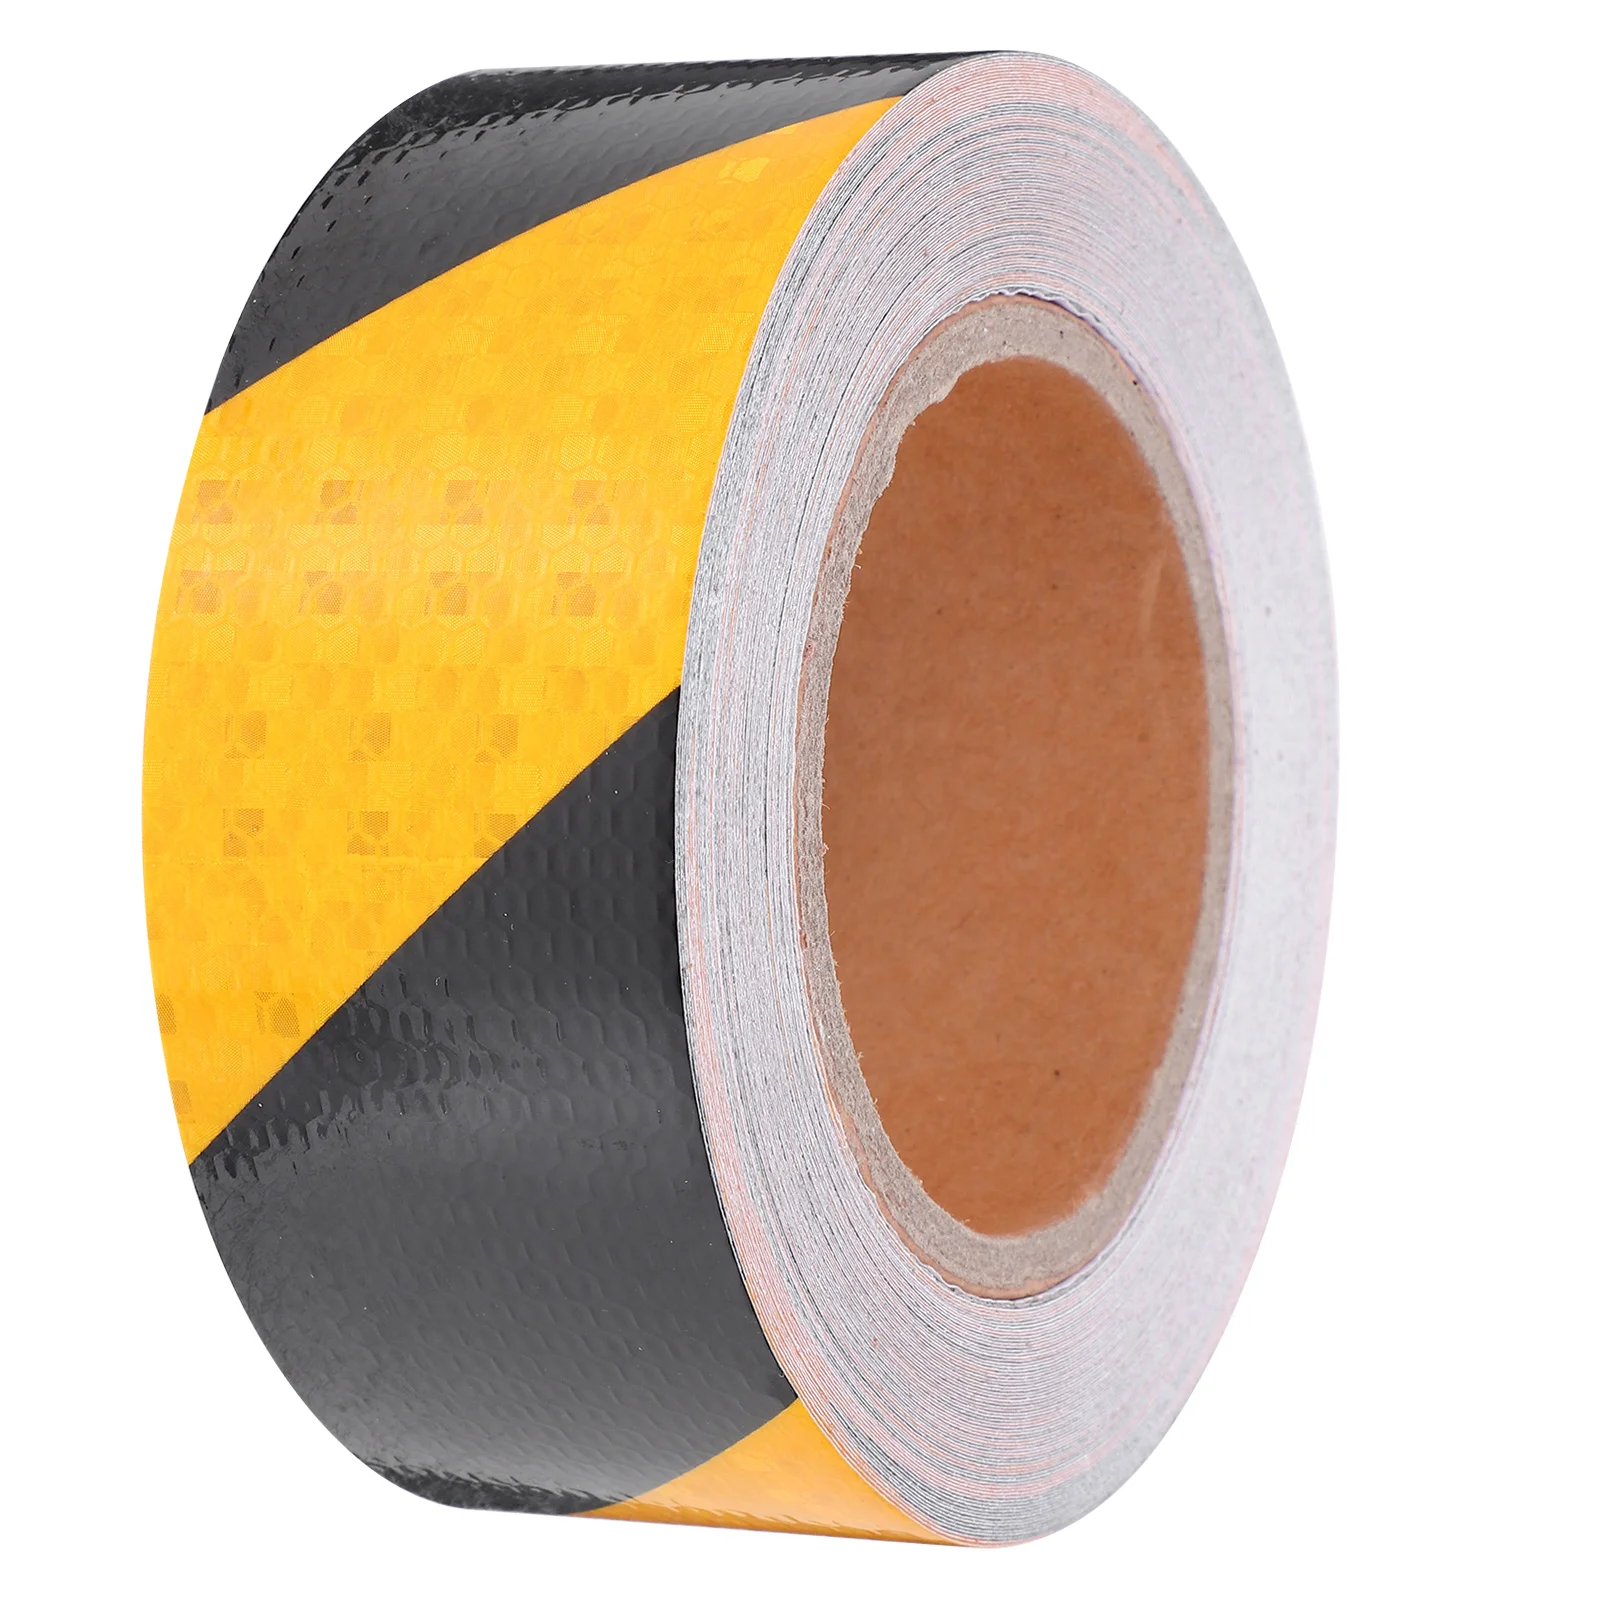 

Reflective Safety Tape Outdoor Sticker Trucks Body Stickers Warning Reflector High Visibility